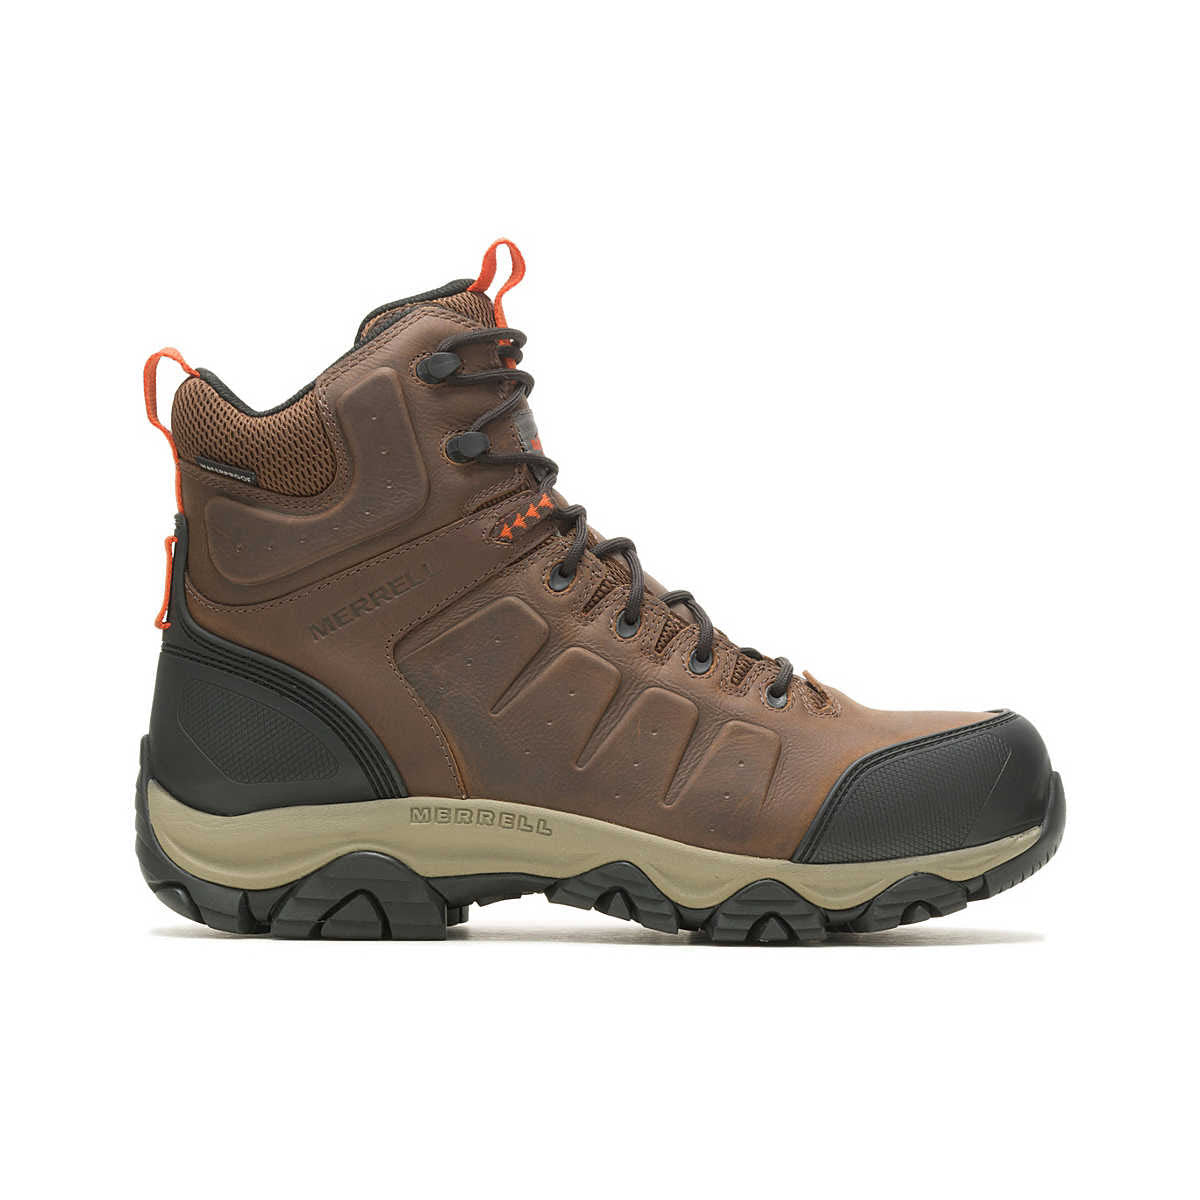 A single brown Merrell Phaserbound 2 WTP CF Earth/Orange hiking boot with black and beige details, featuring orange accents and the brand logo. It includes a COMFORTBASE rubberized EVA midsole for enhanced support.